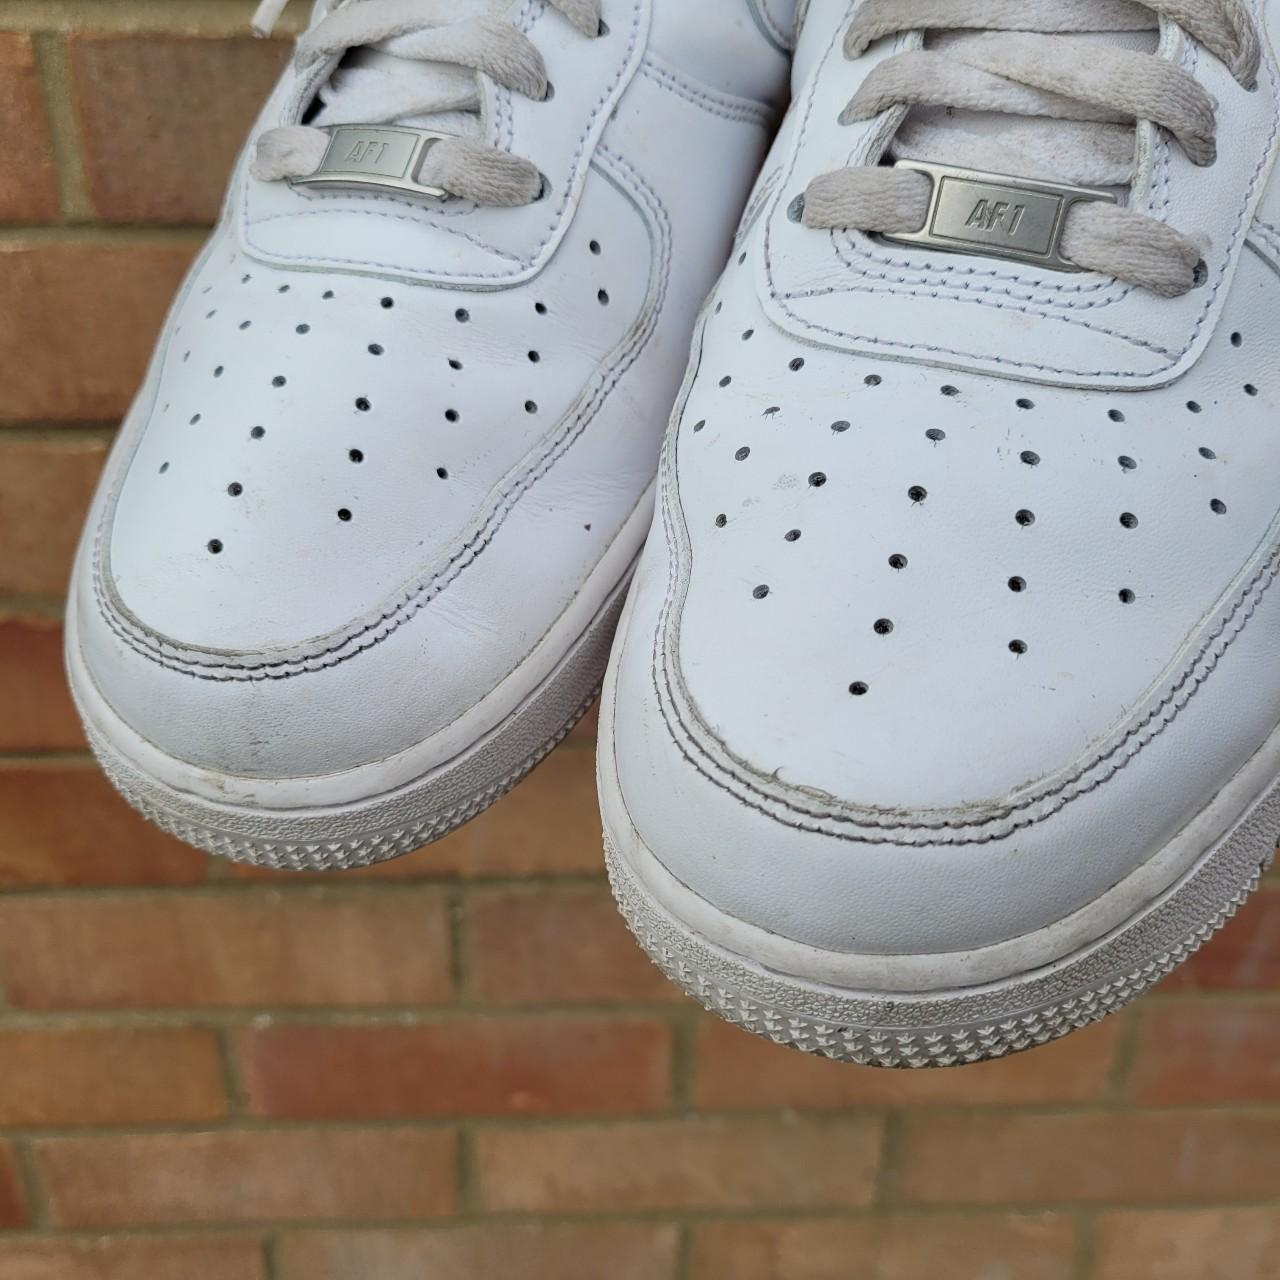 Nike Air Force 1 '07 White Trainers Size UK 10 EUR... - Depop